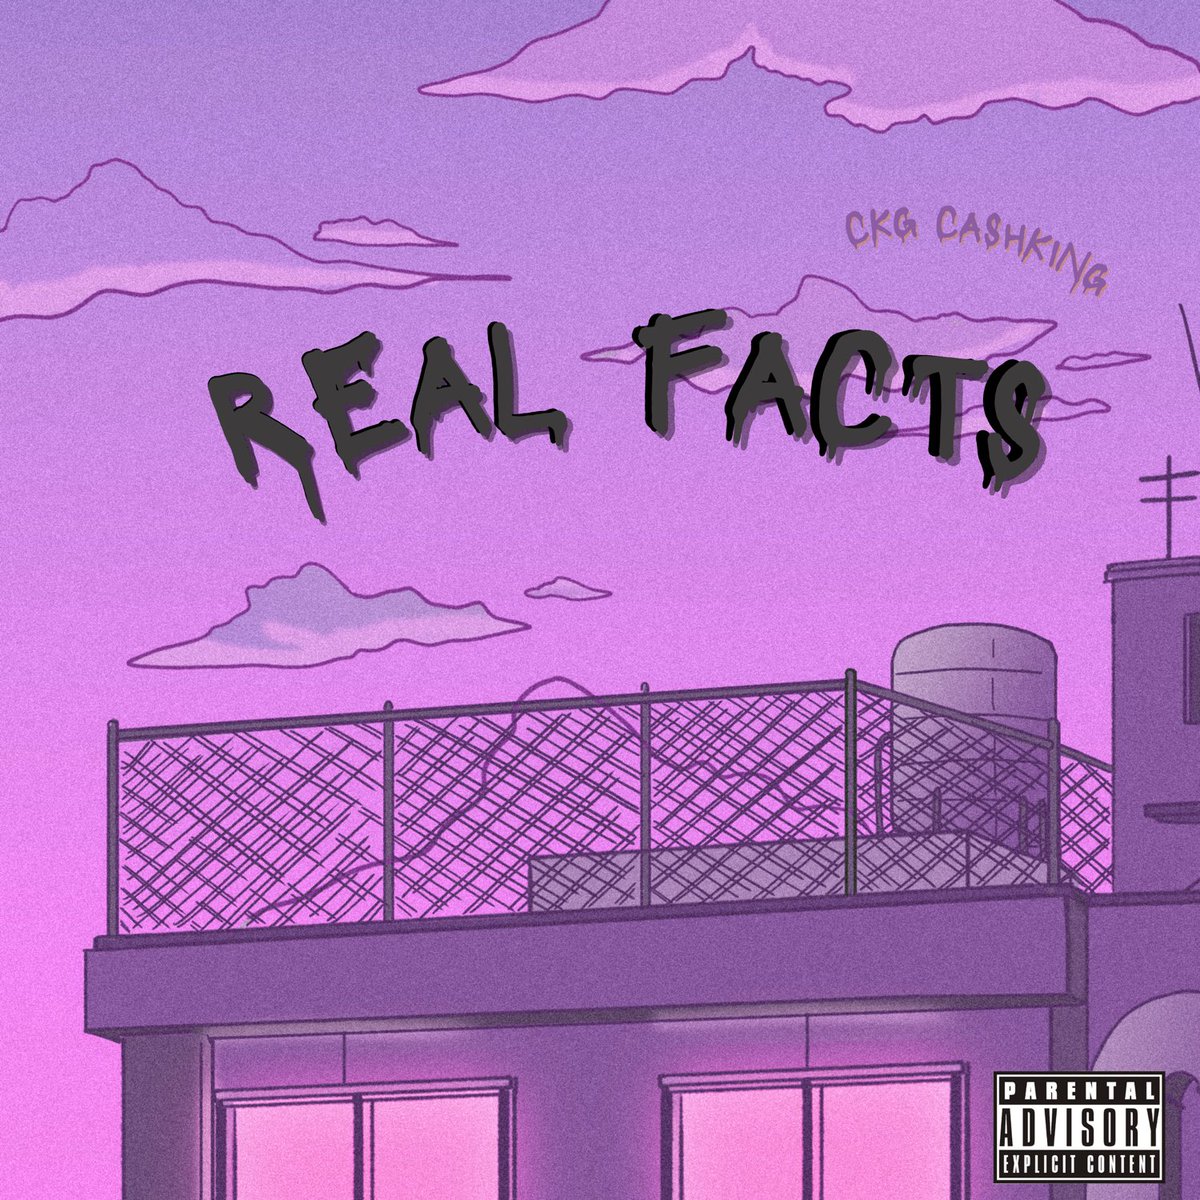 #realfacts music video out now #youtube youtu.be/Fg9zZf-7mH0?si…